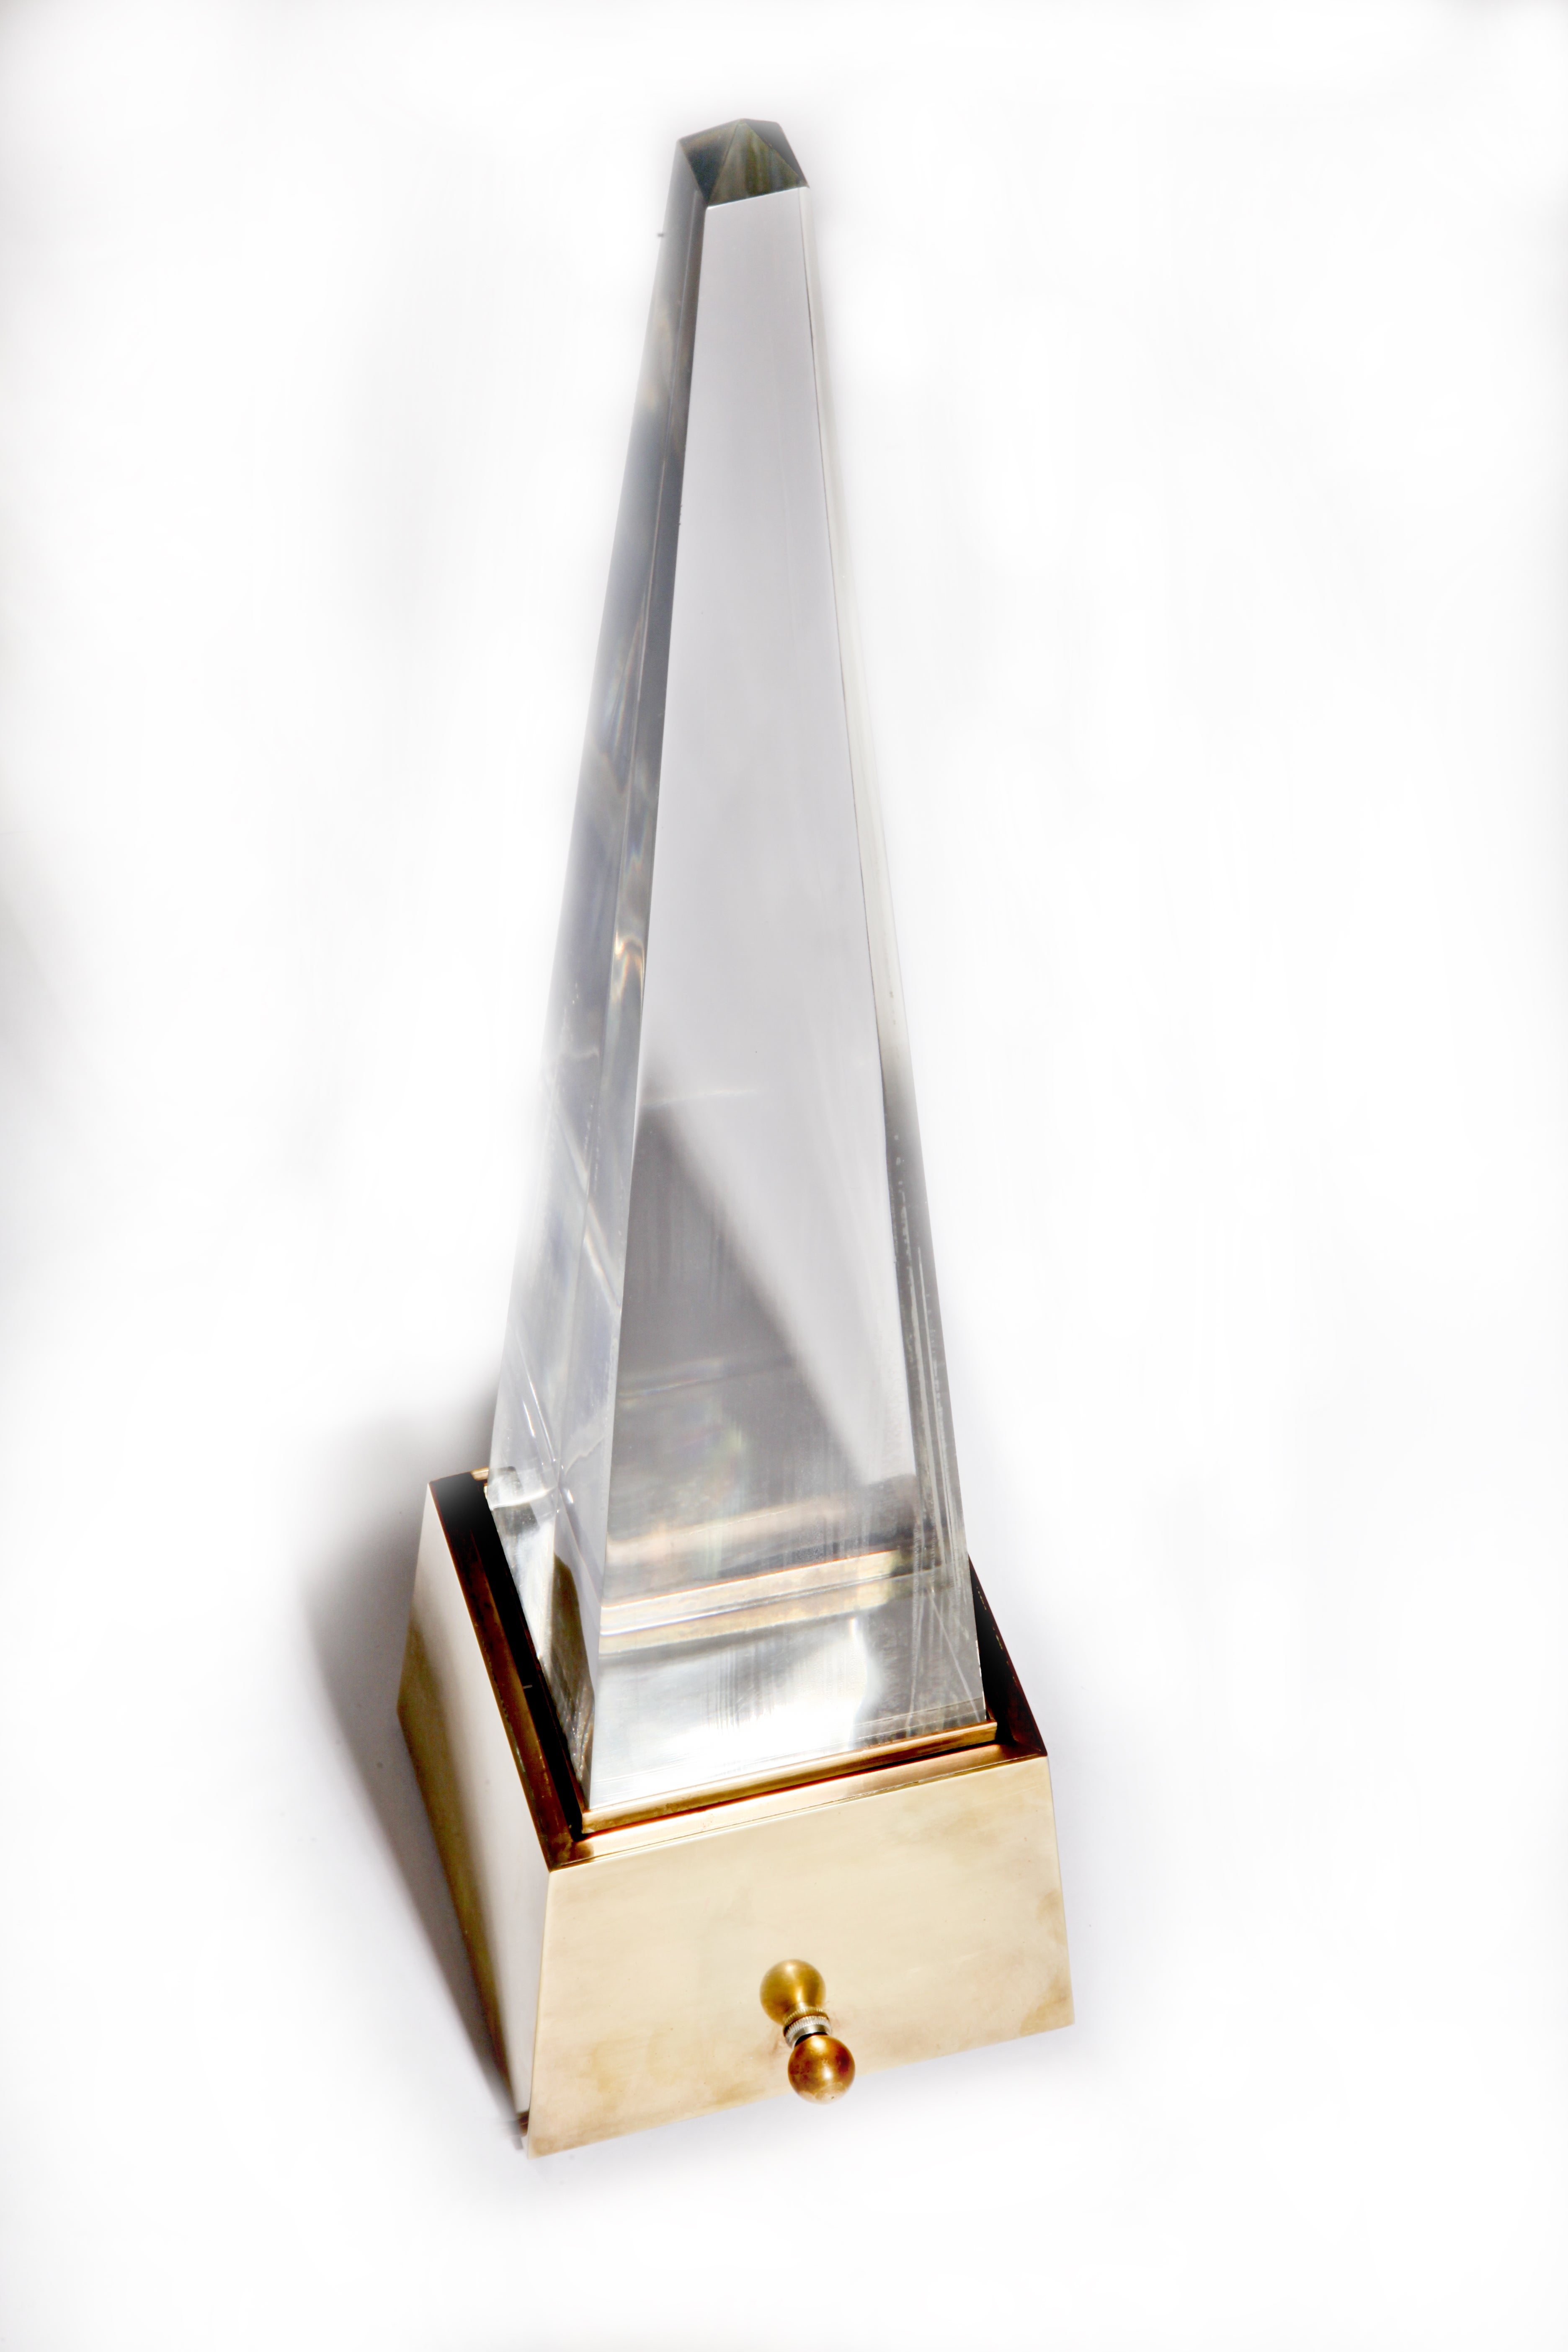 Rare Lucite and Brass Obelisk Lamp by Chapman